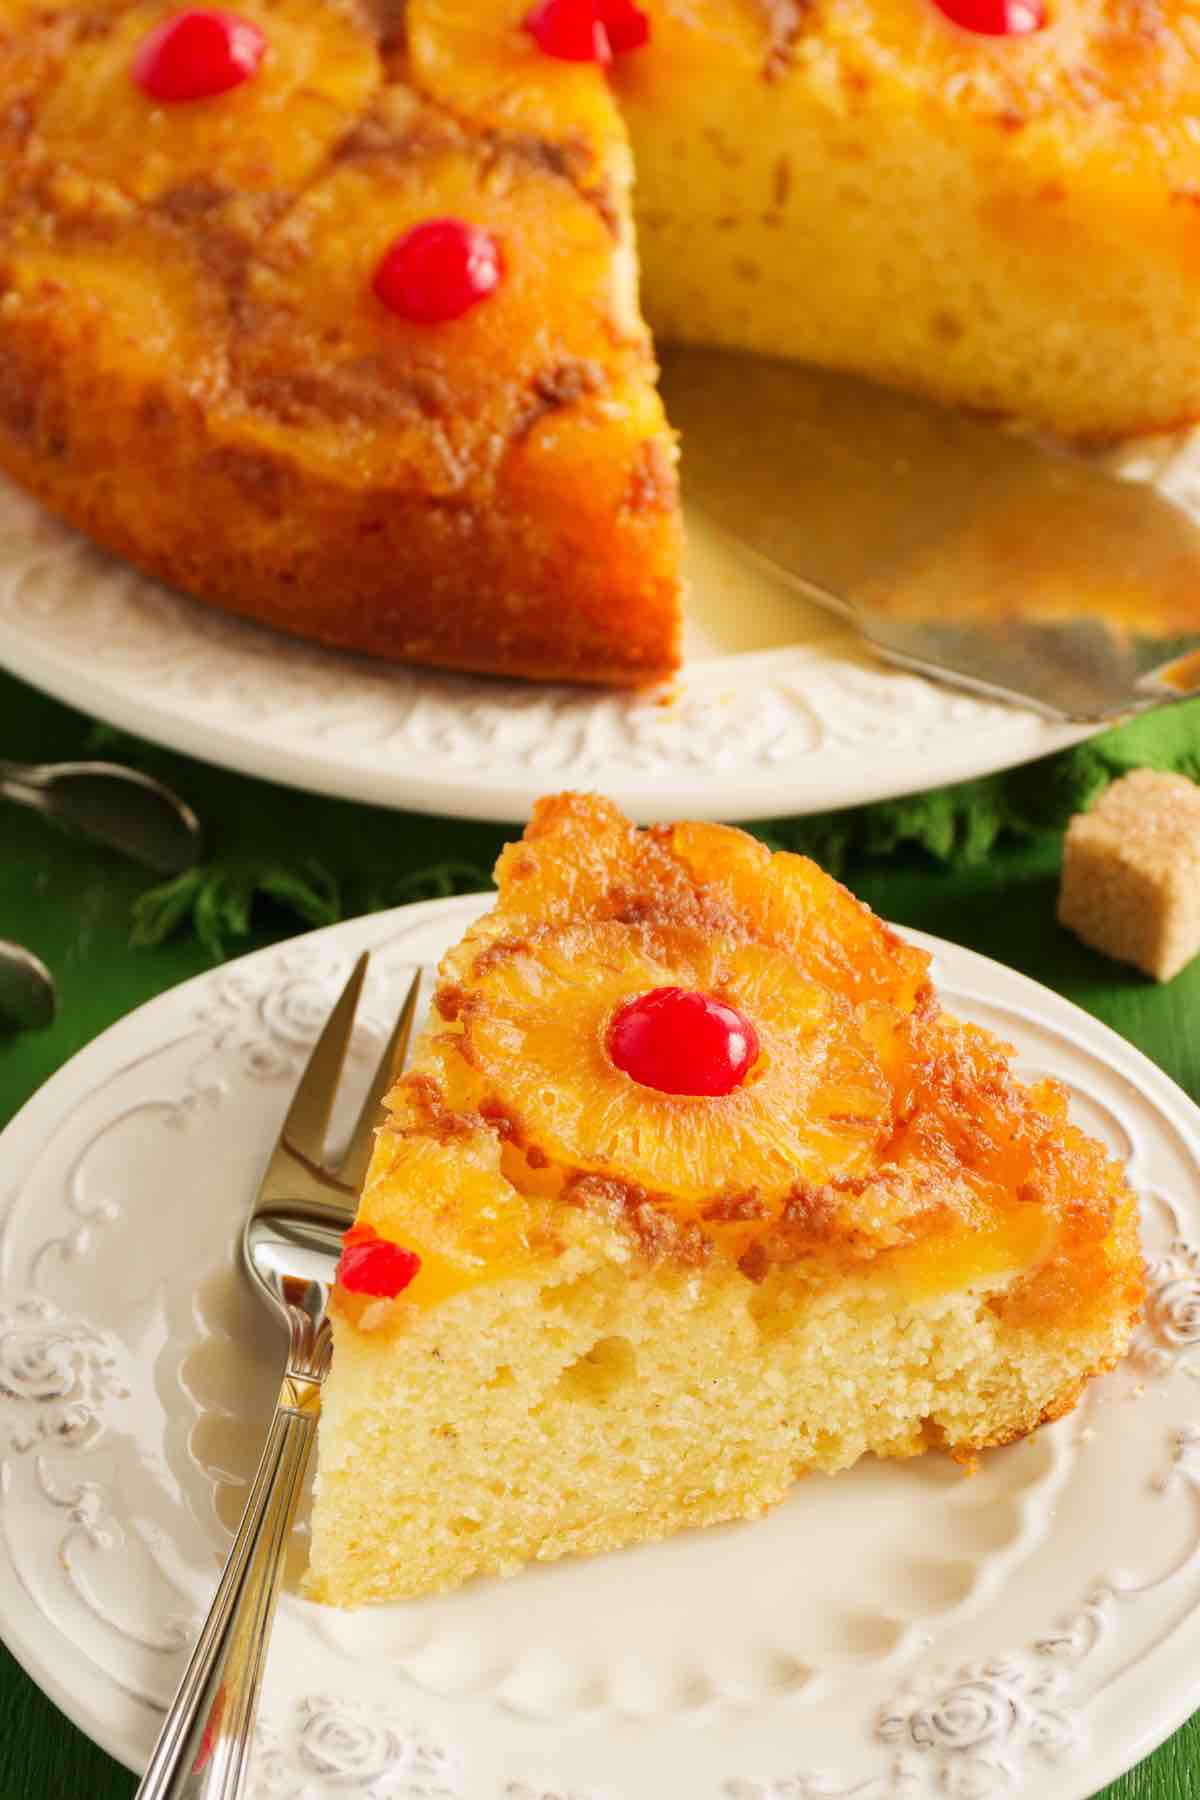 This Duncan Hines Pineapple Upside Cake is soft, fluffy, and moist. Made with Duncan Hines cake mix with a beautiful topping of caramelized pineapples and maraschino cherries, this classic recipe is so easy to prepare with a secret shortcut. It might be old-fashioned, but it’s far from boring!